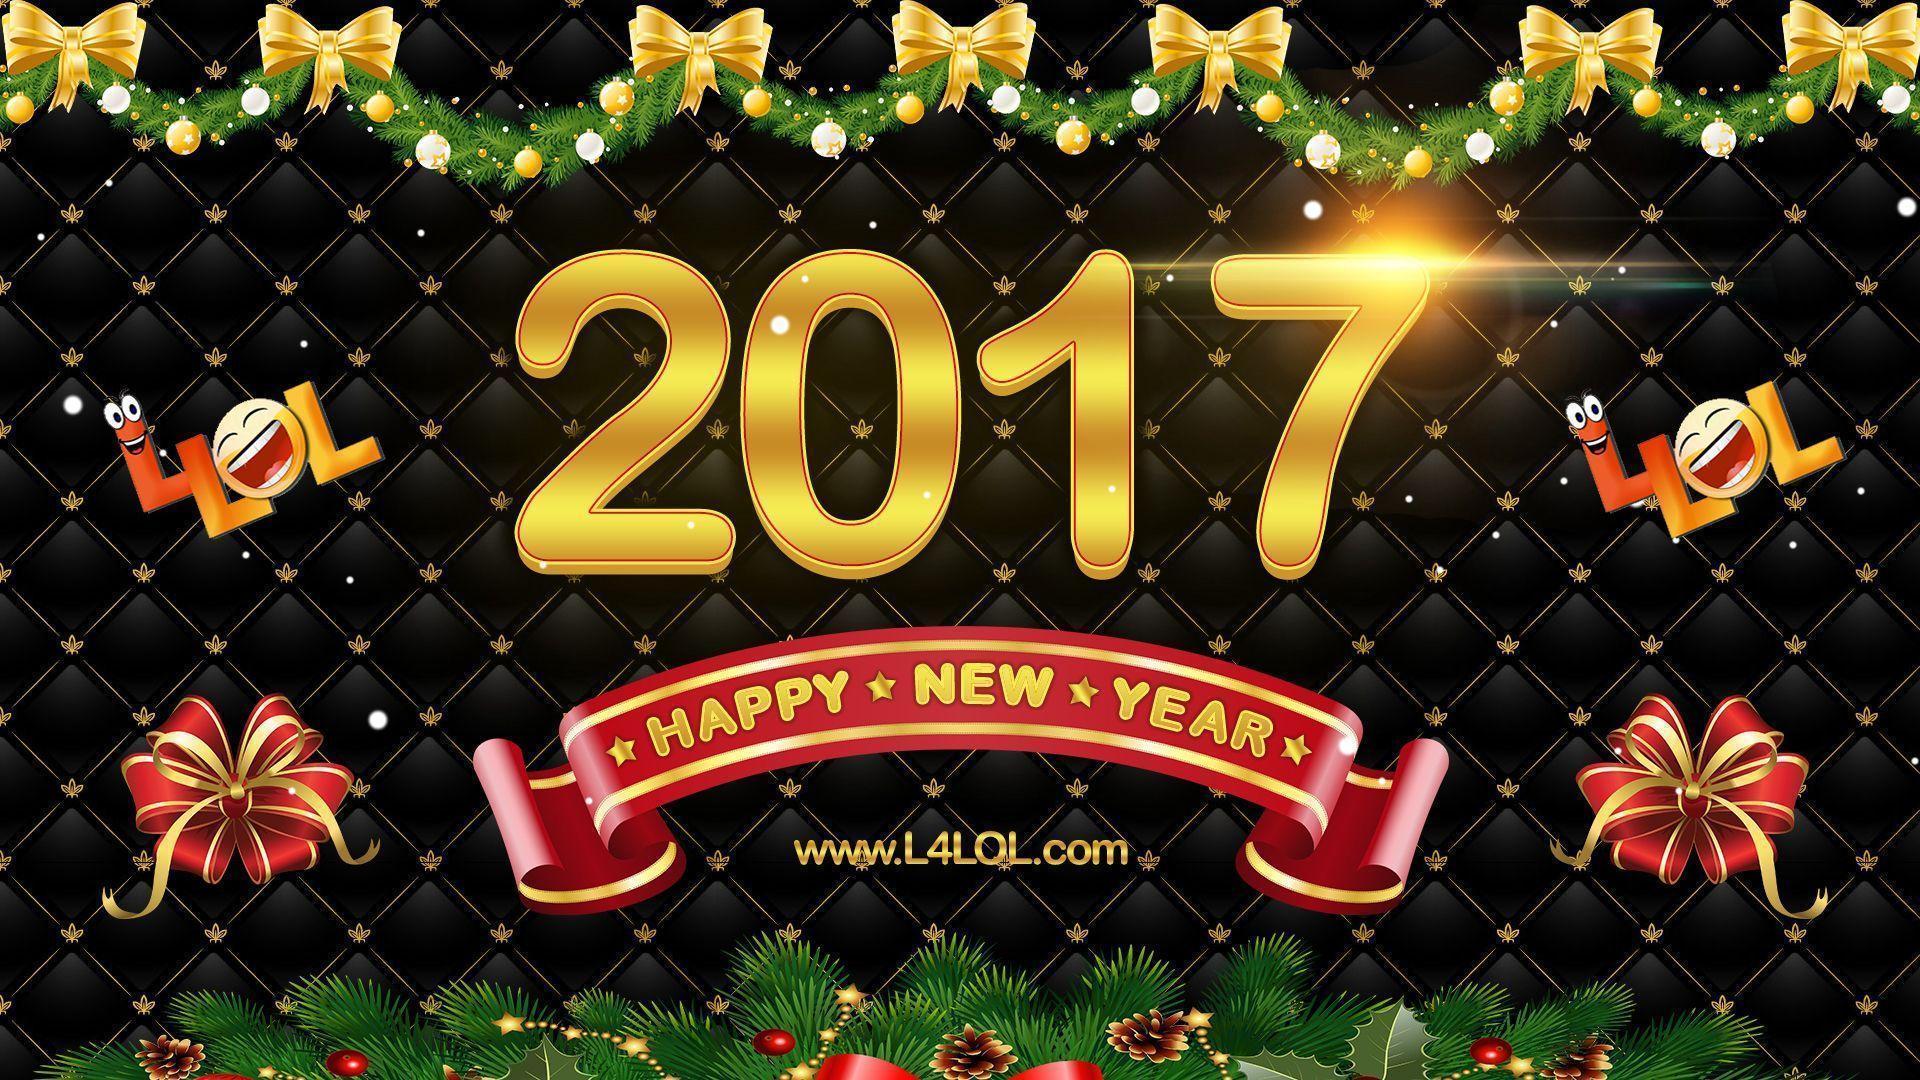 Happy New Year Picture and Wallpaper 2017 Free Downlaod